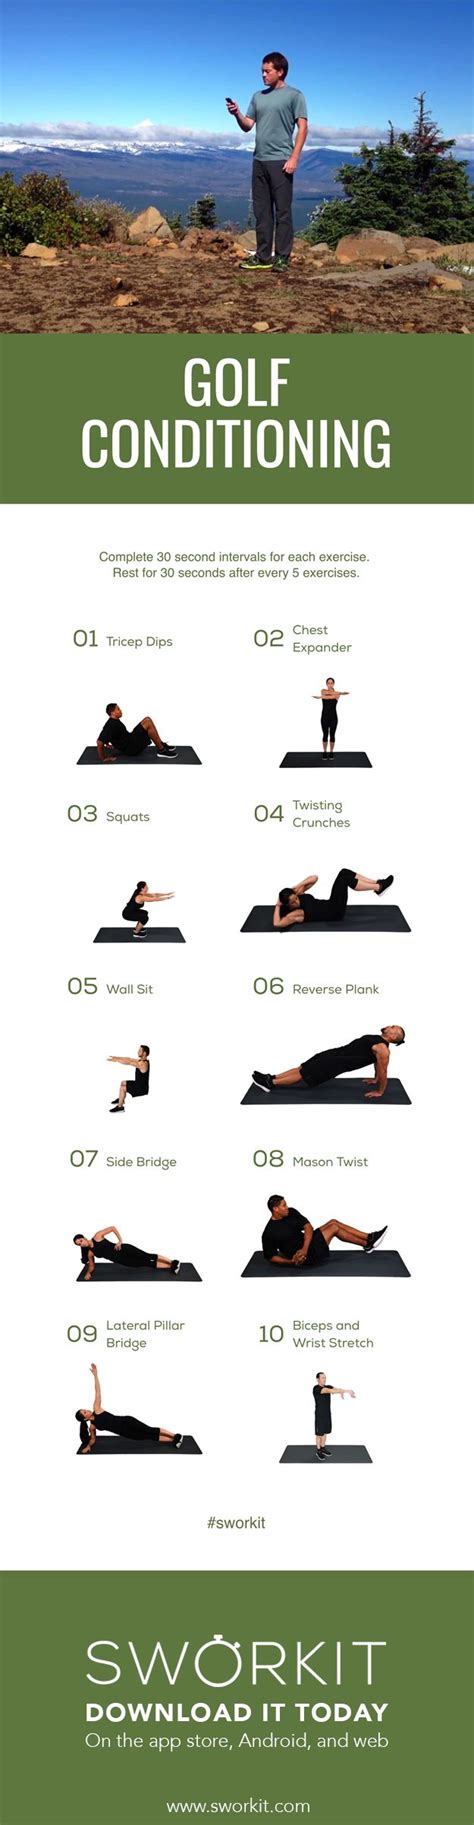 Best 25+ Conditioning workouts ideas on Pinterest | Cardio ...